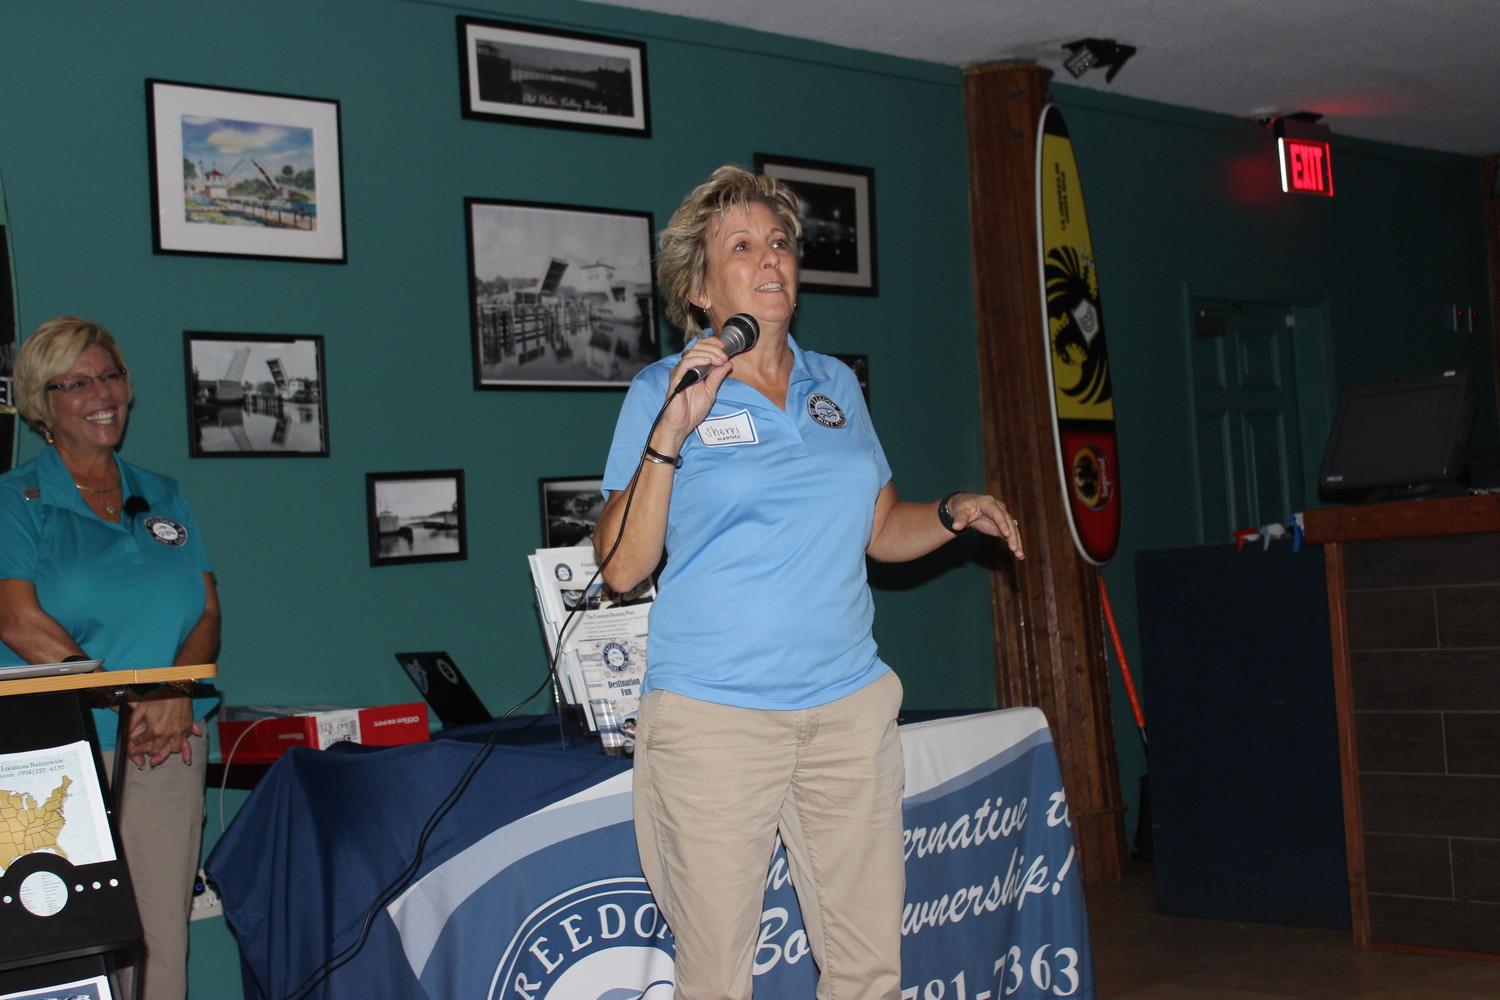 Sherri Anthony delivers a Freedom Boat Club membership testimonial at the Chamber ribbon cutting event.